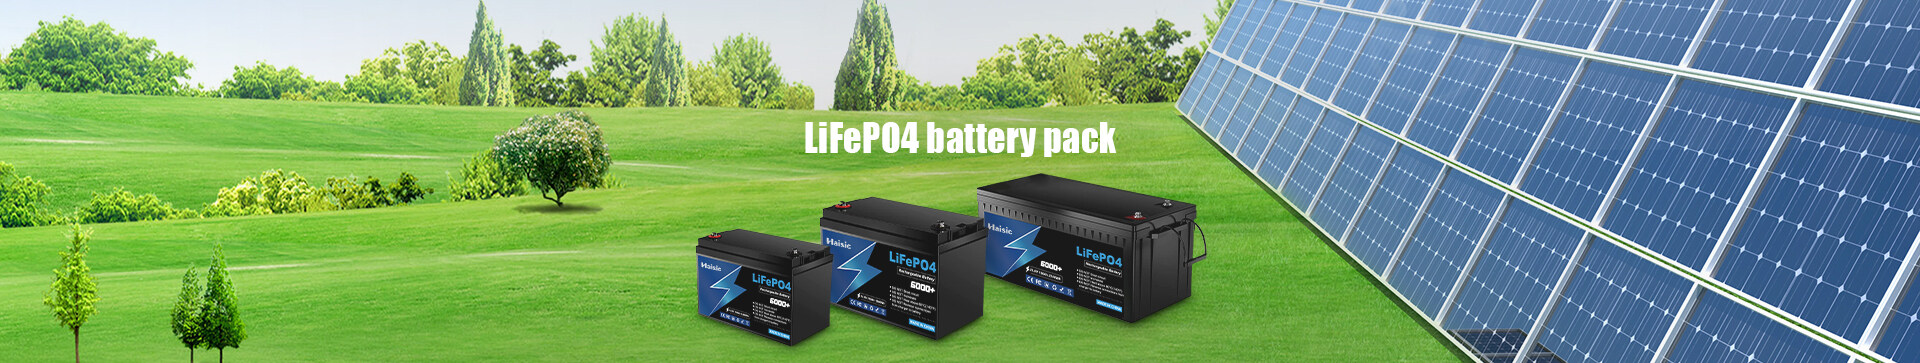 odm lifepo4 lithium ion battery manufacturer, lifepo4 lithium ion battery supplier